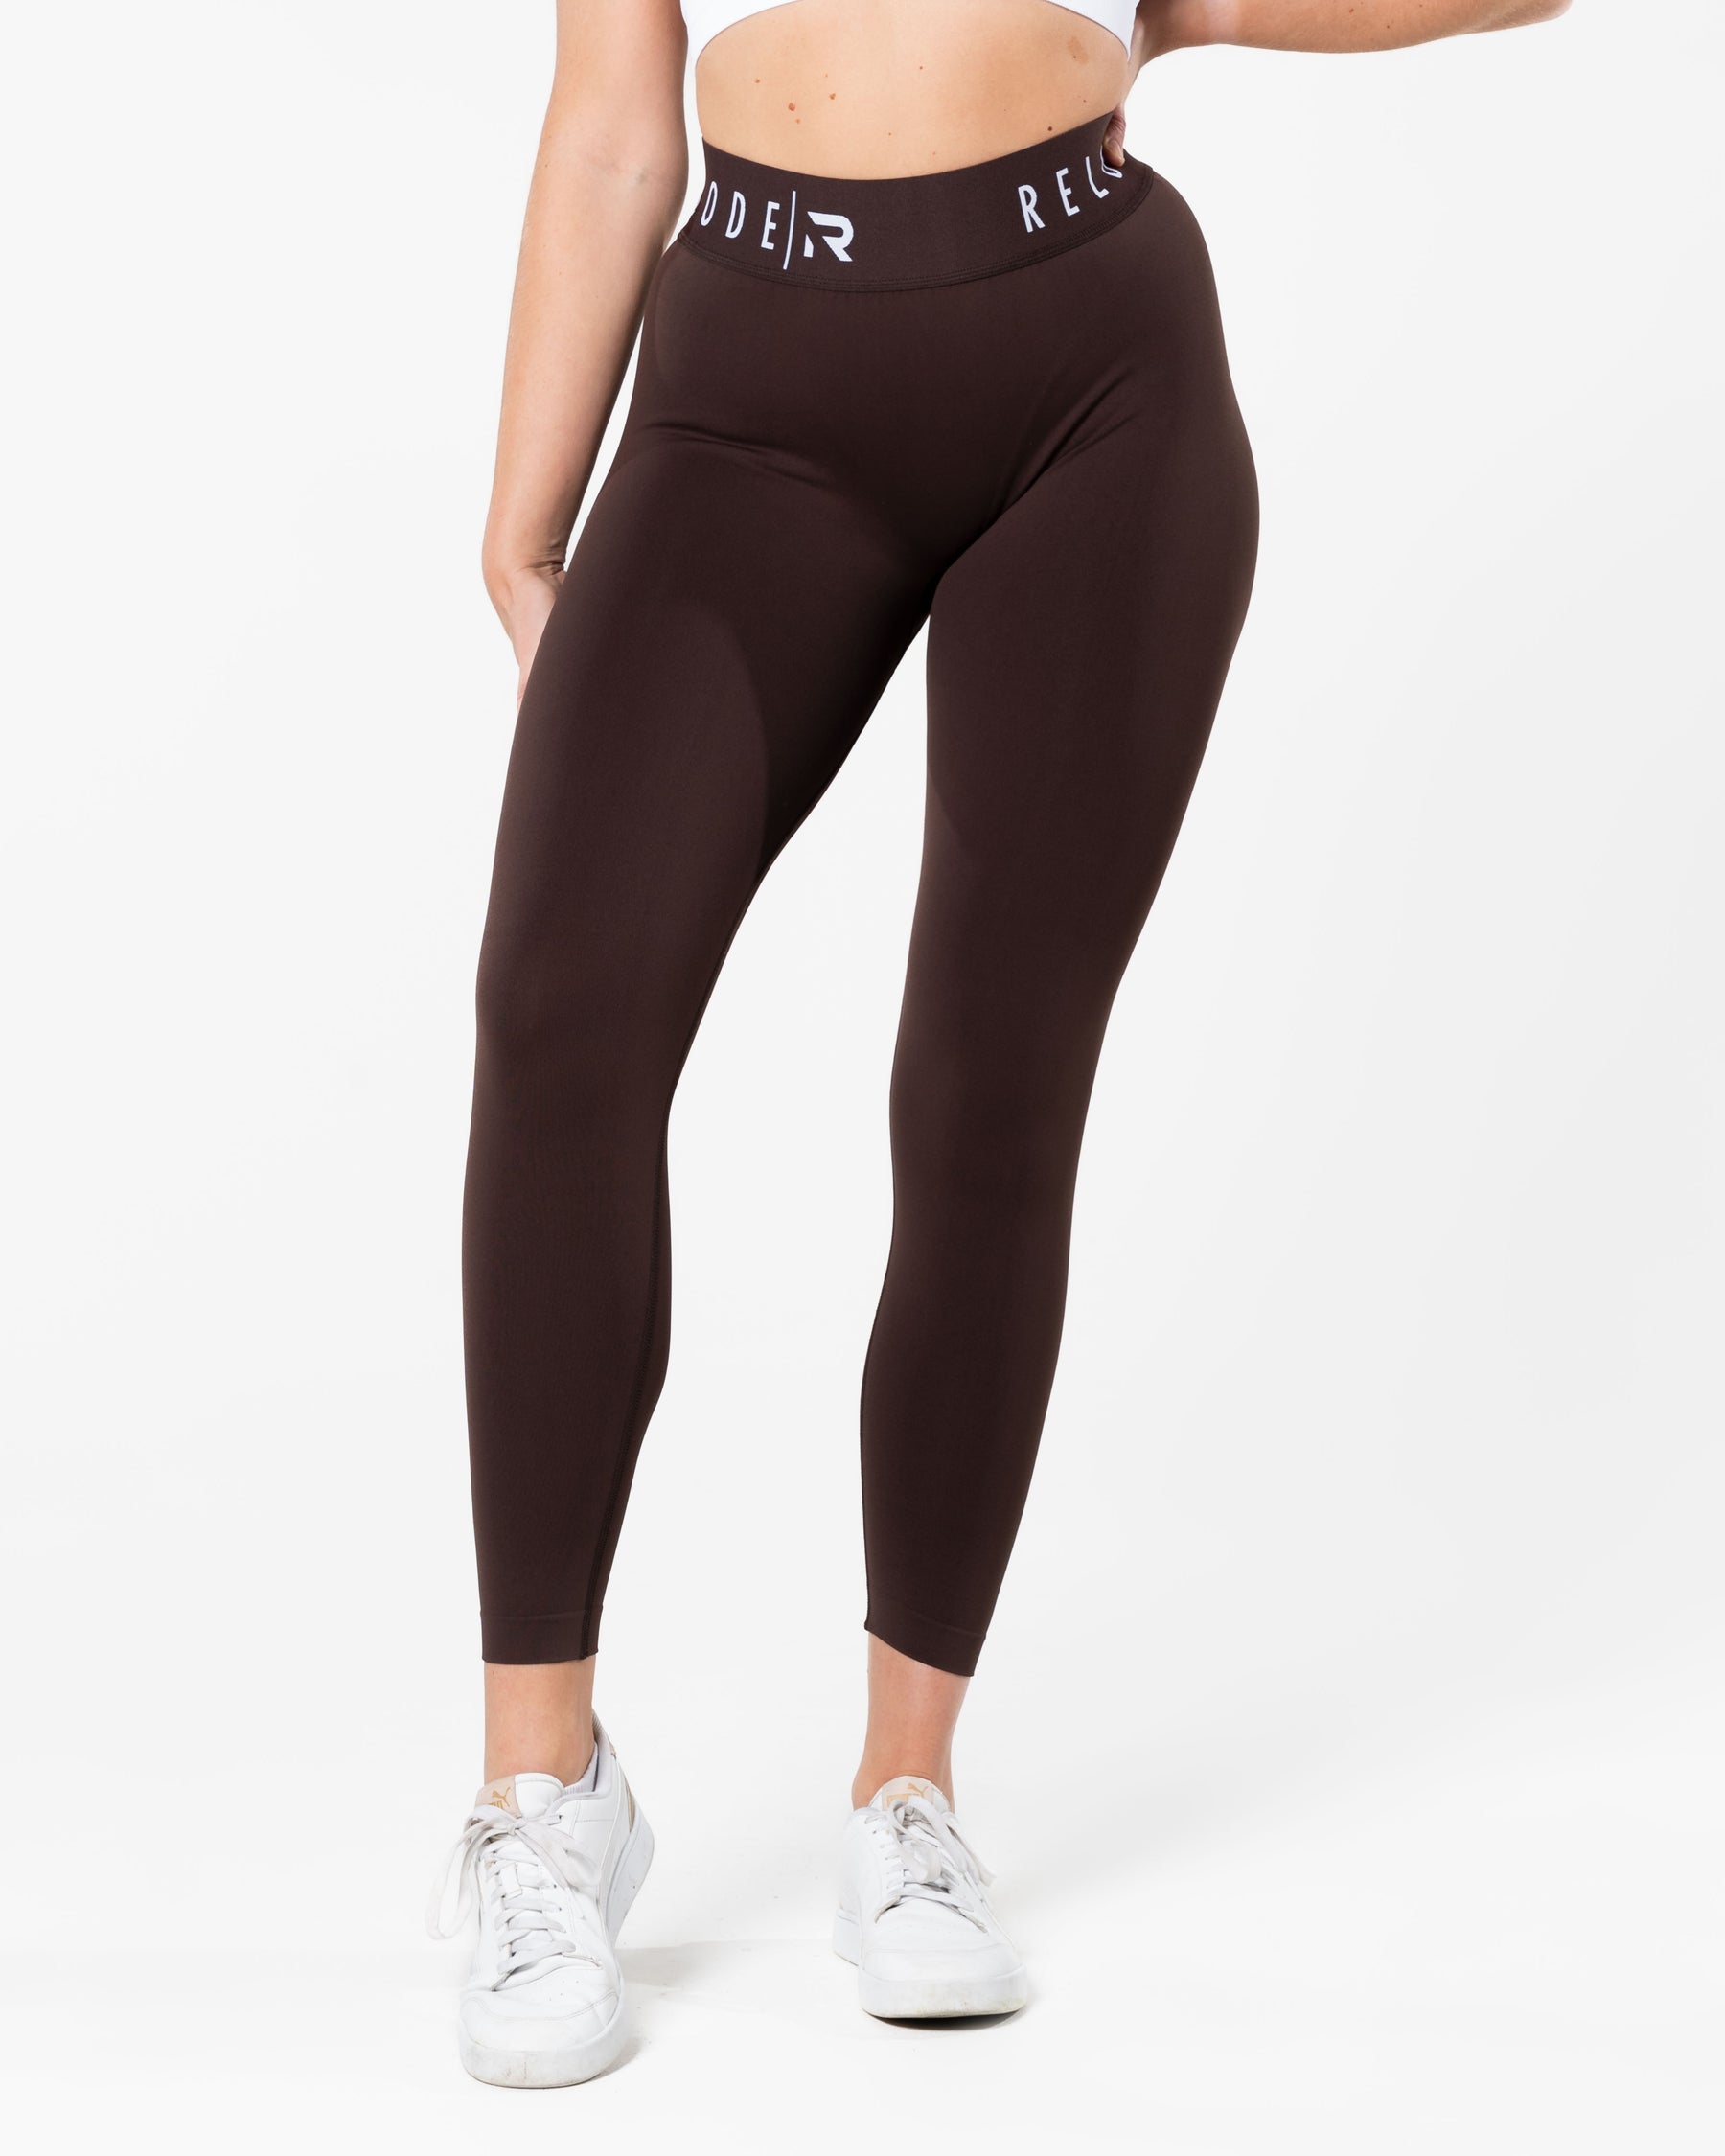 Apex Seamless Tights - Brown - RELODE